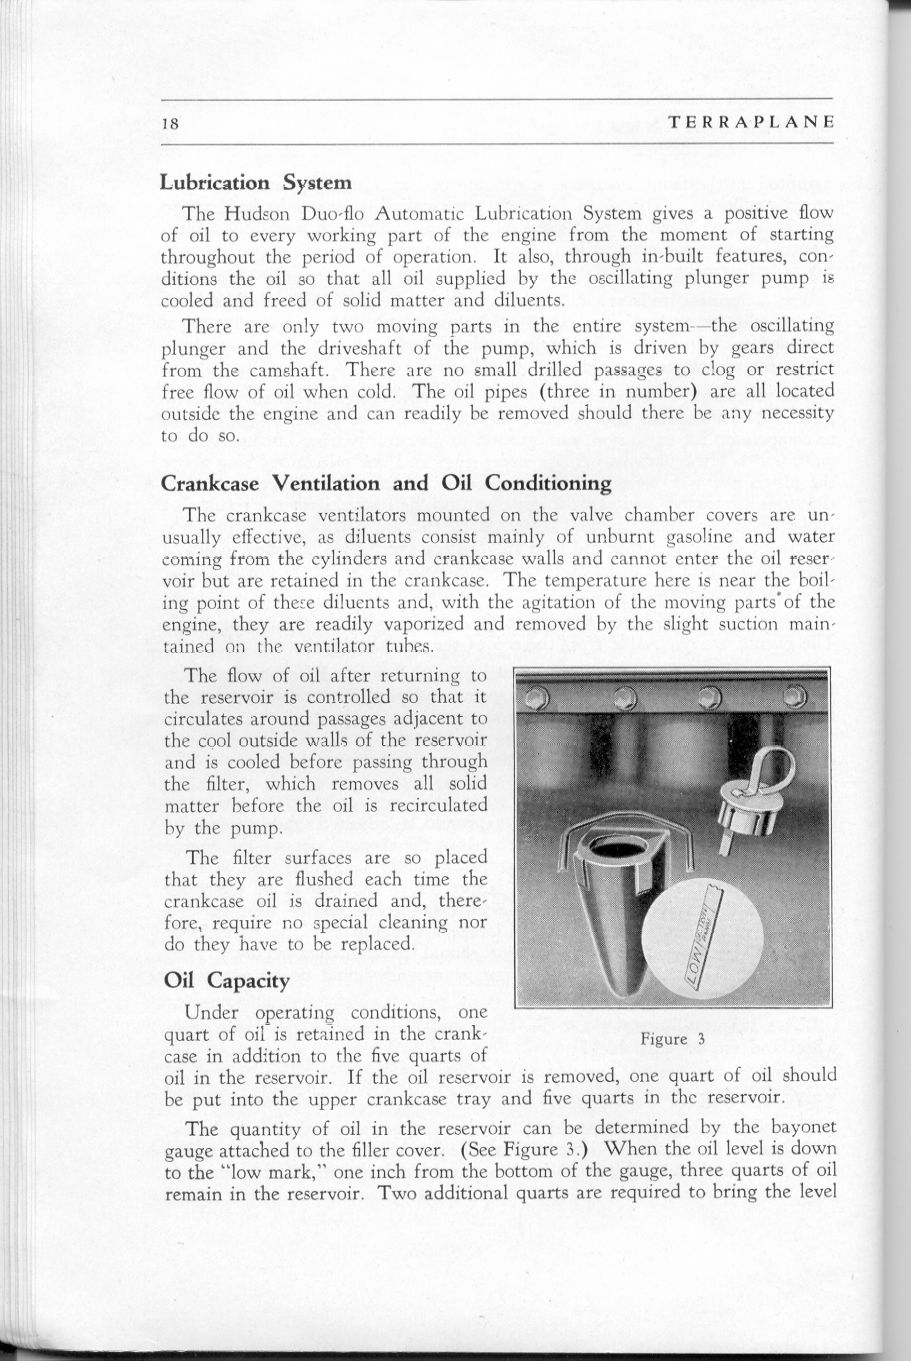 1937 Hudson Terraplane Owners Manual Page 23